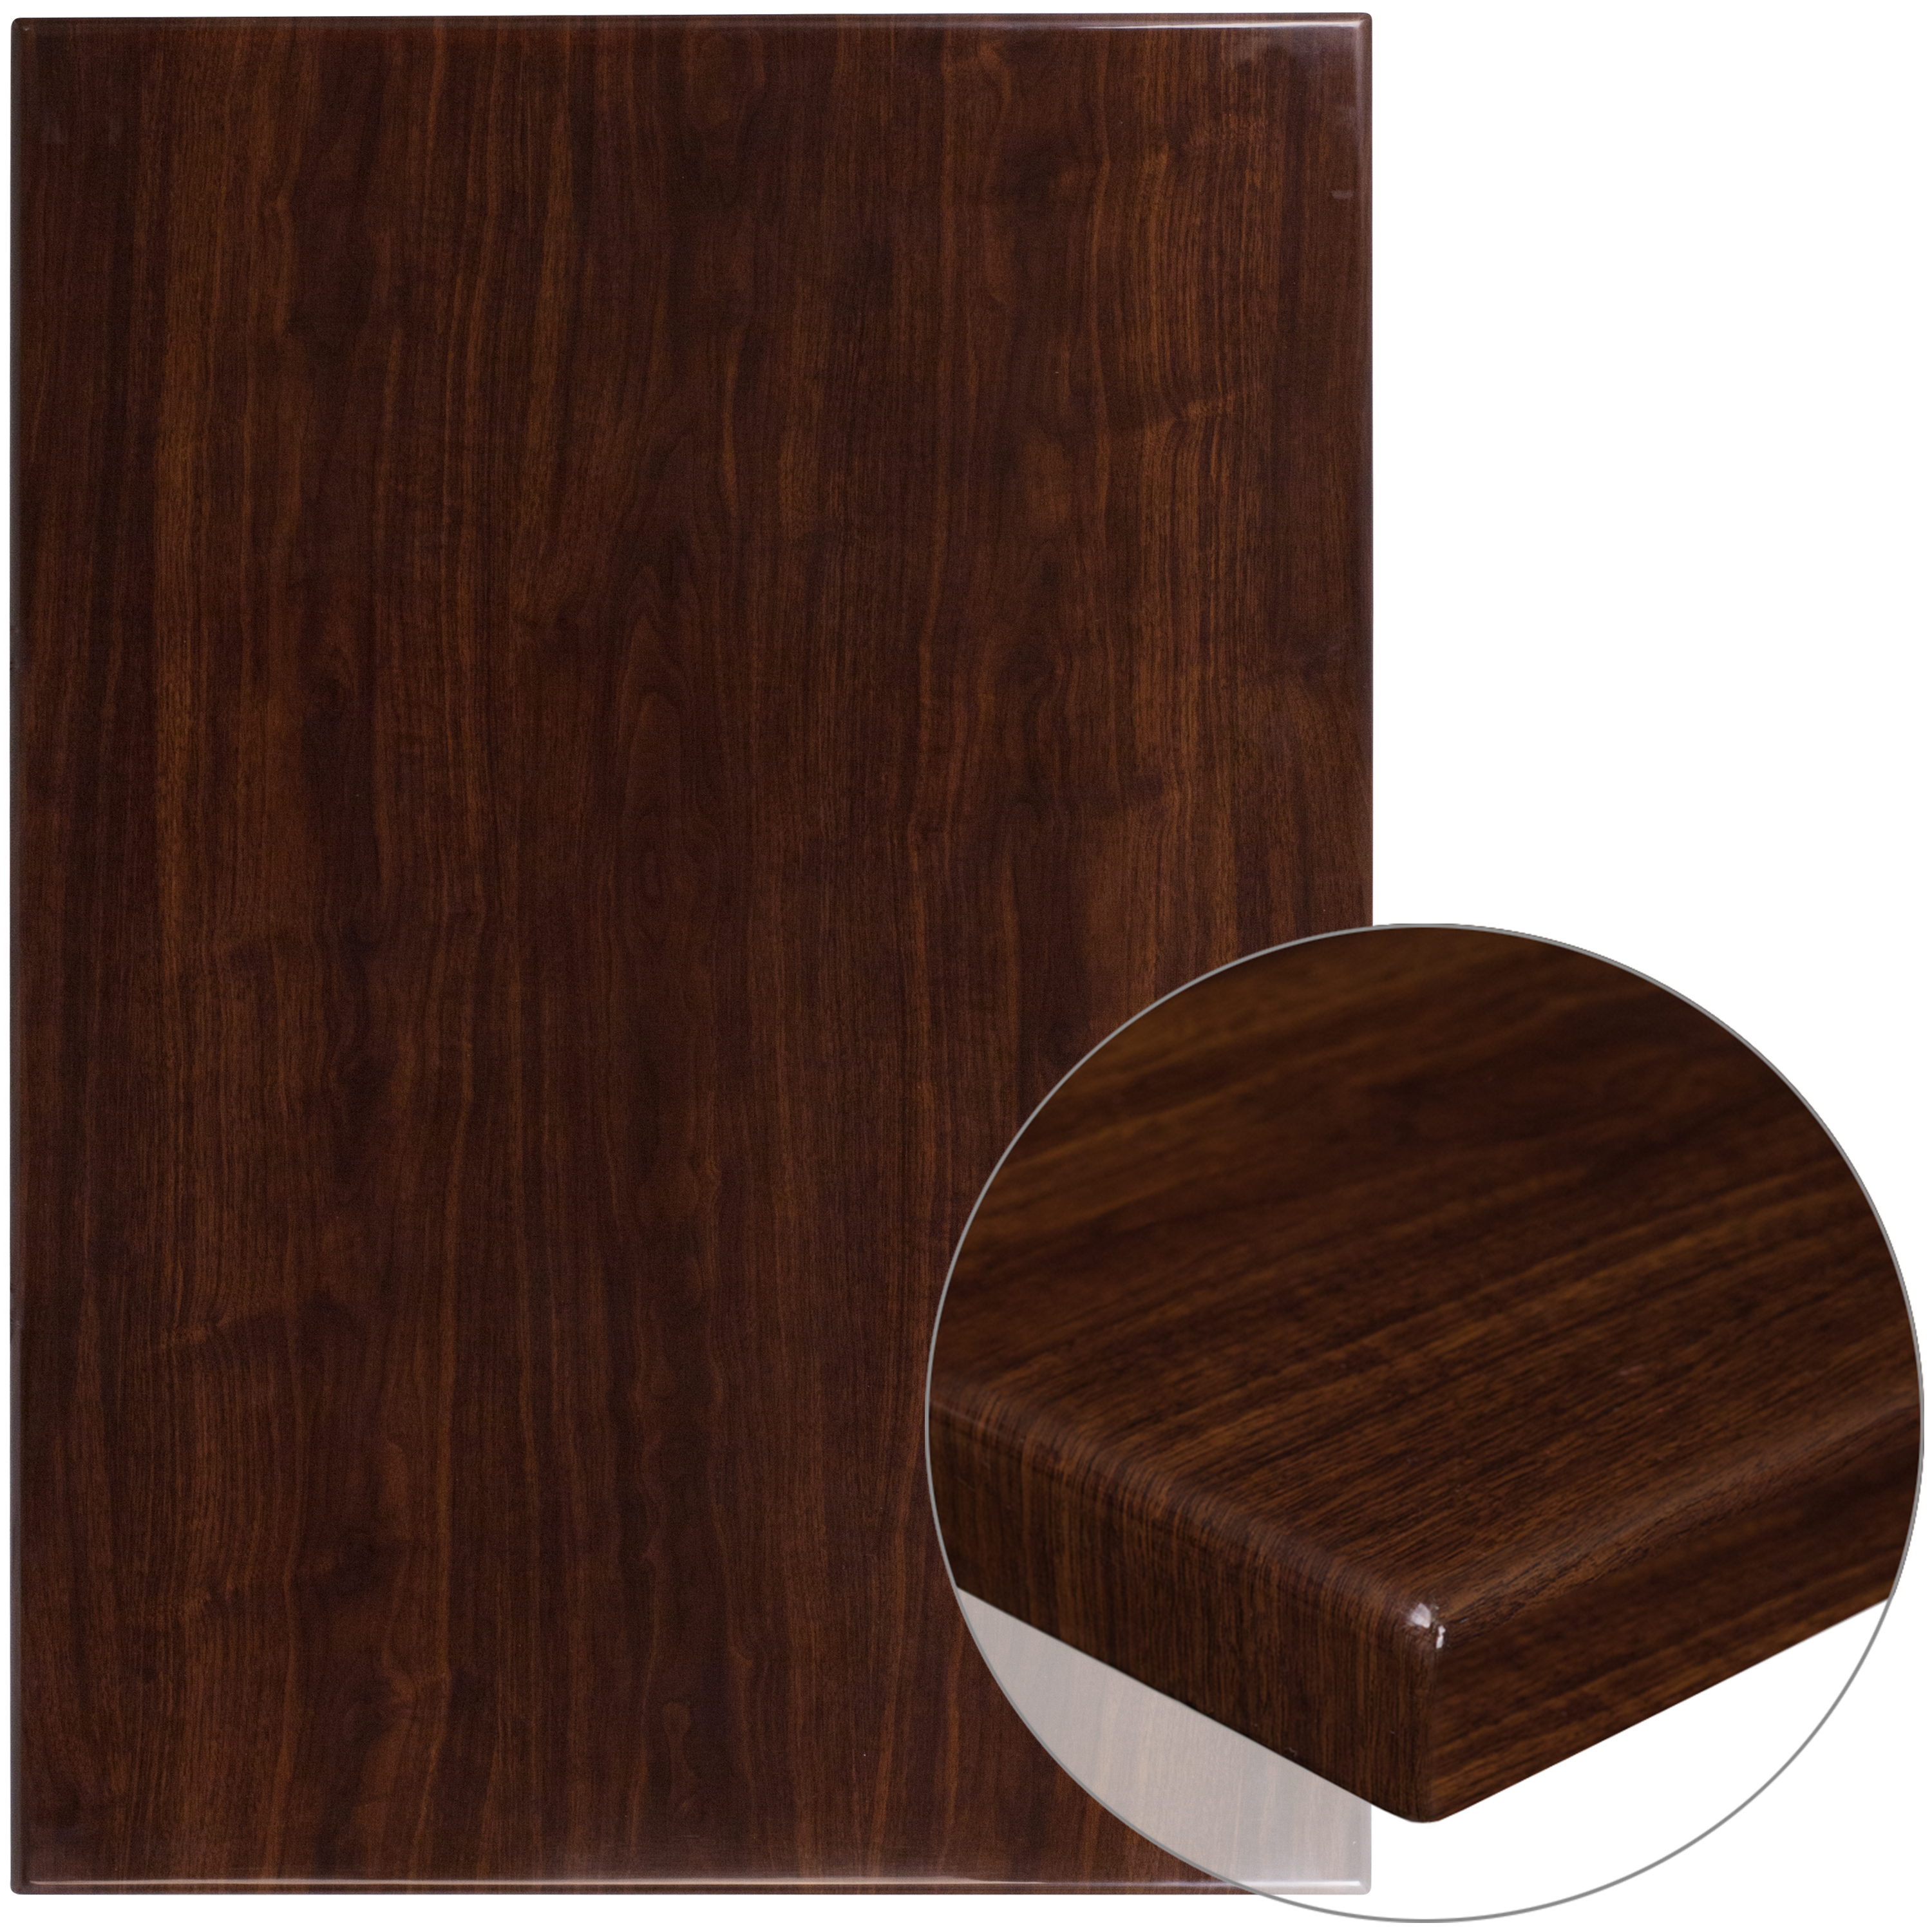 Flash Furniture TP-WAL-3042-GG 30" x 42" Rectangular High-Gloss Walnut Resin Table Top with 2" Thick Edge